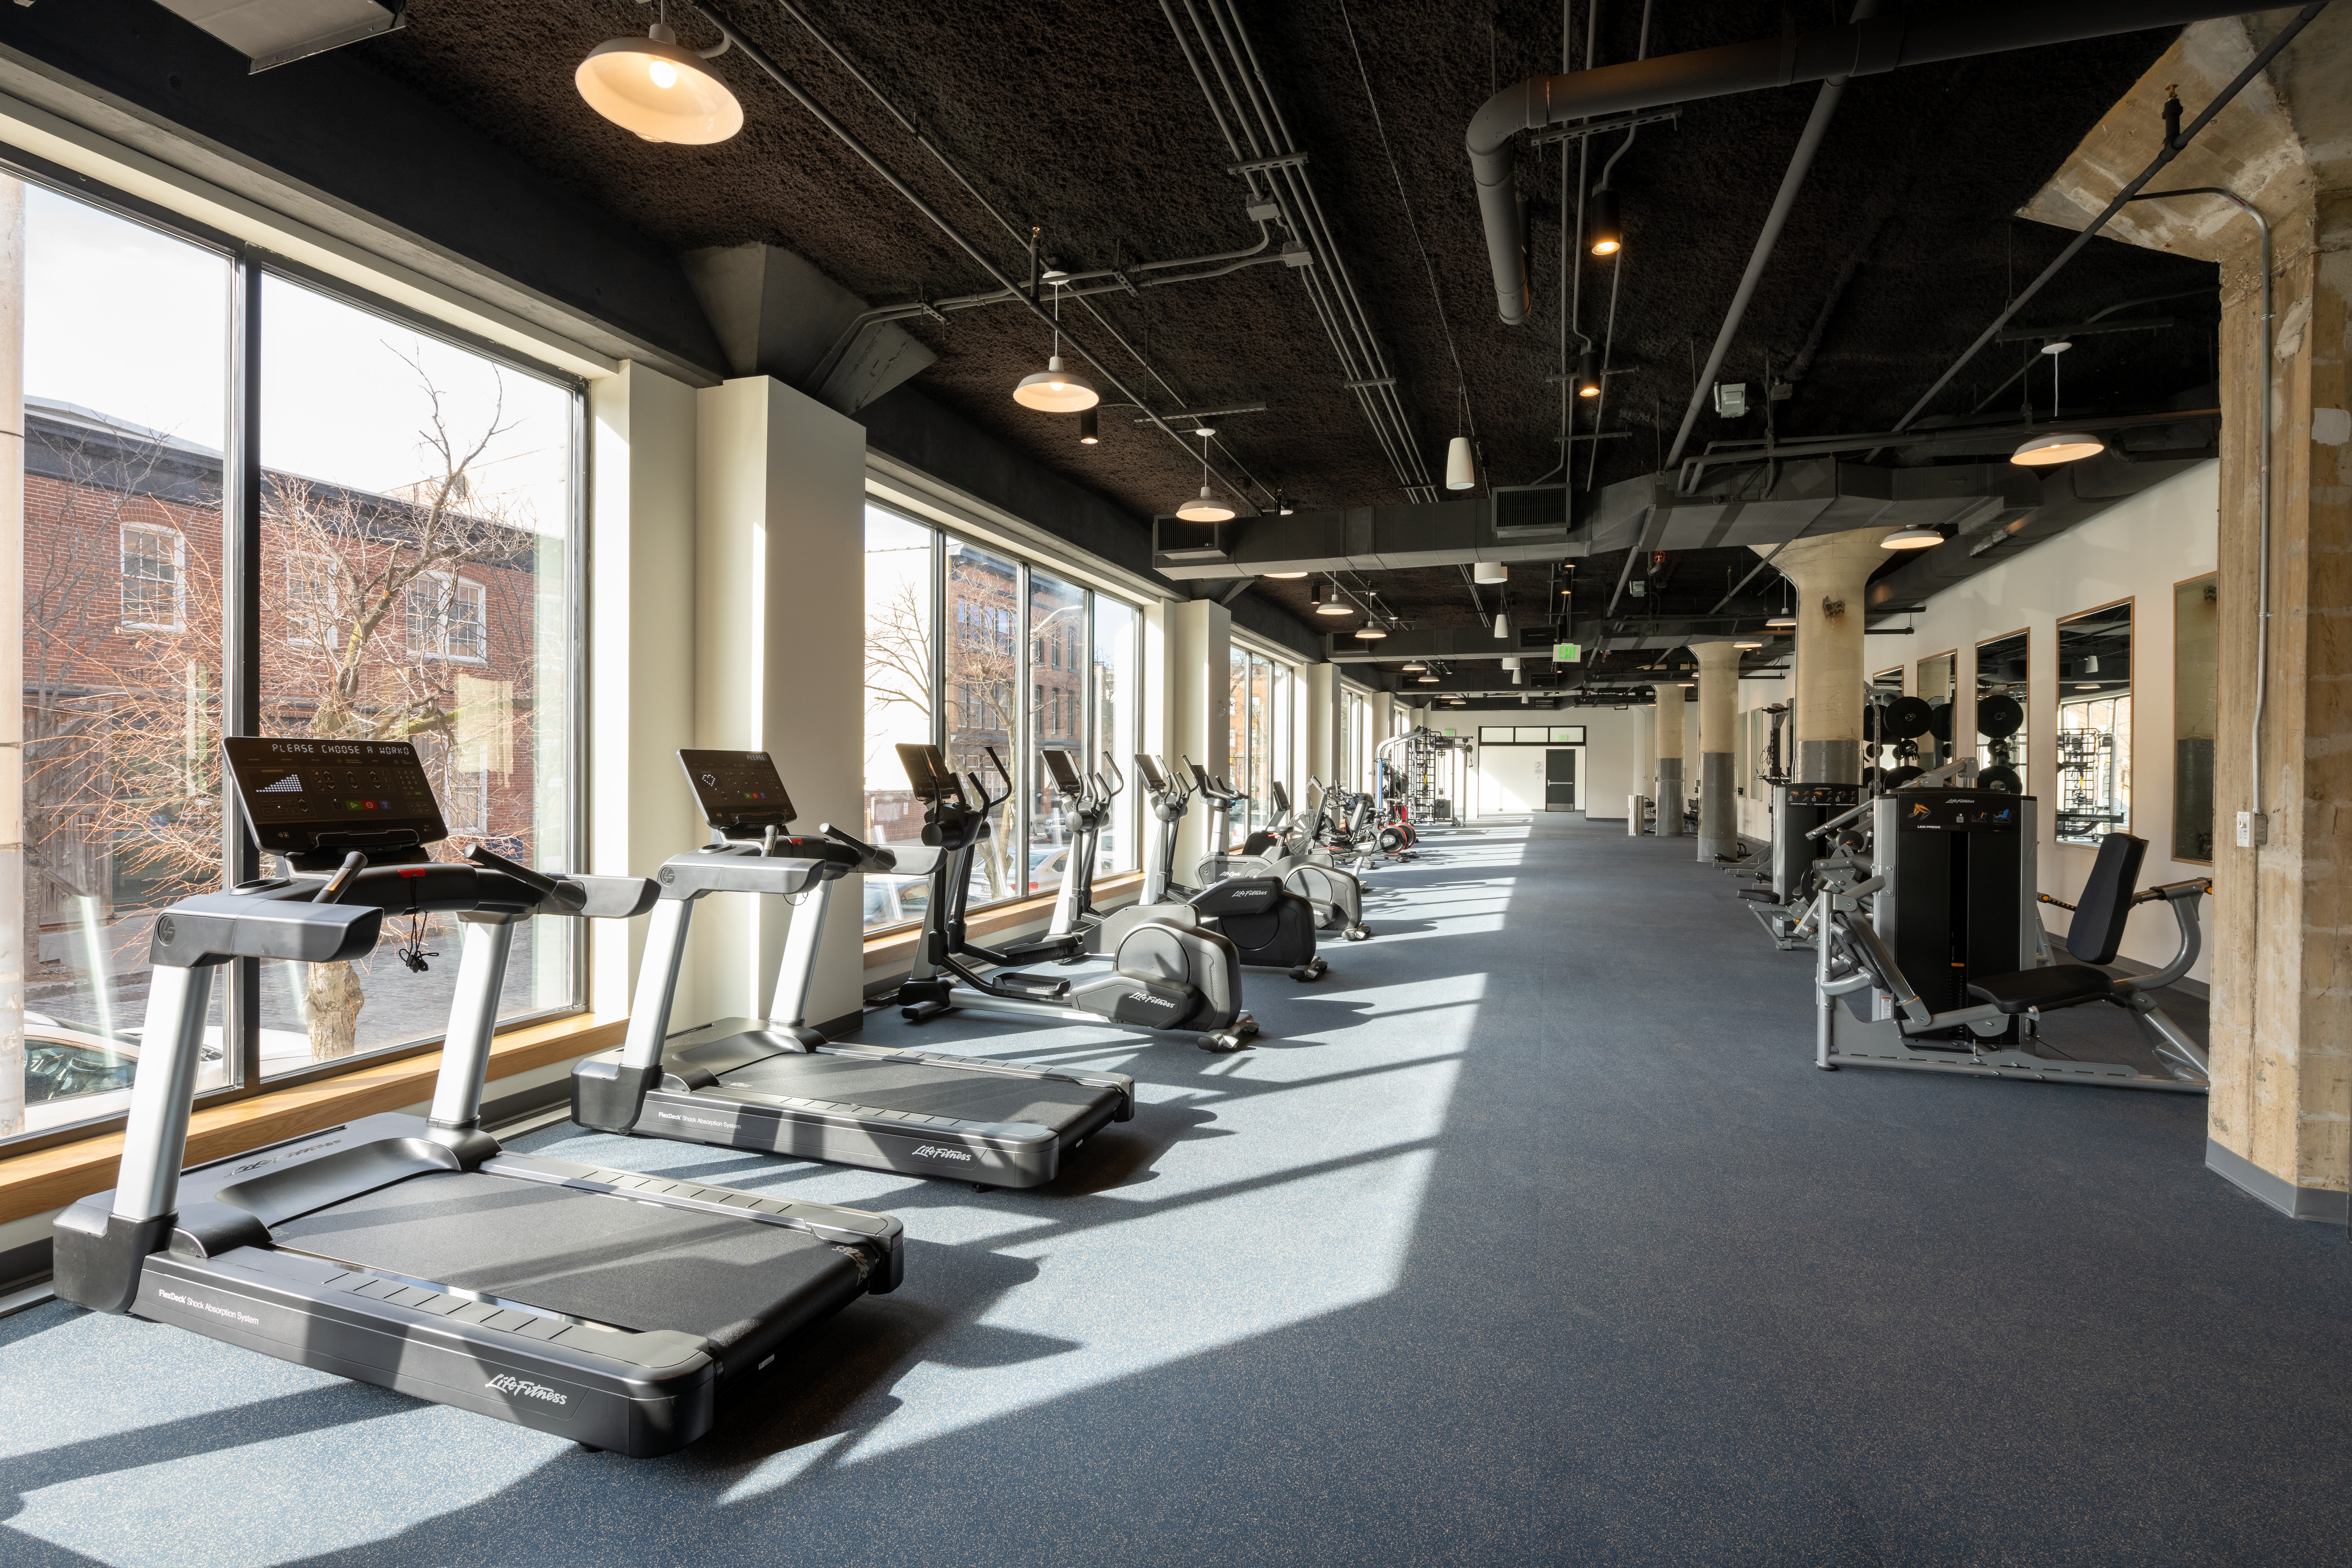  Fitness center at Elms Fells Point in Baltimore, Maryland